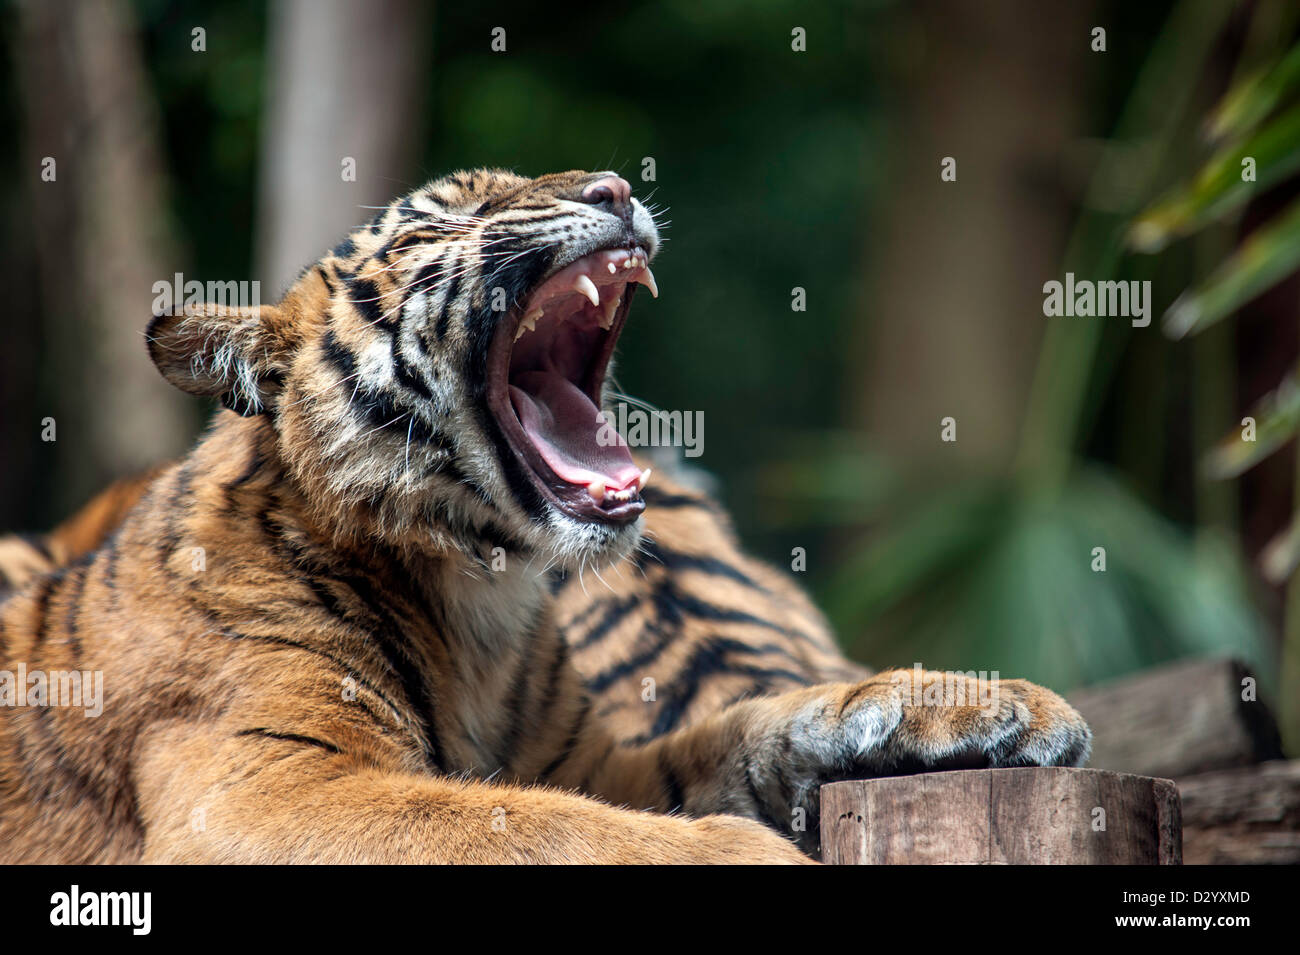 A tiger cub with mouth wide open yawning or growling. Stock Photo